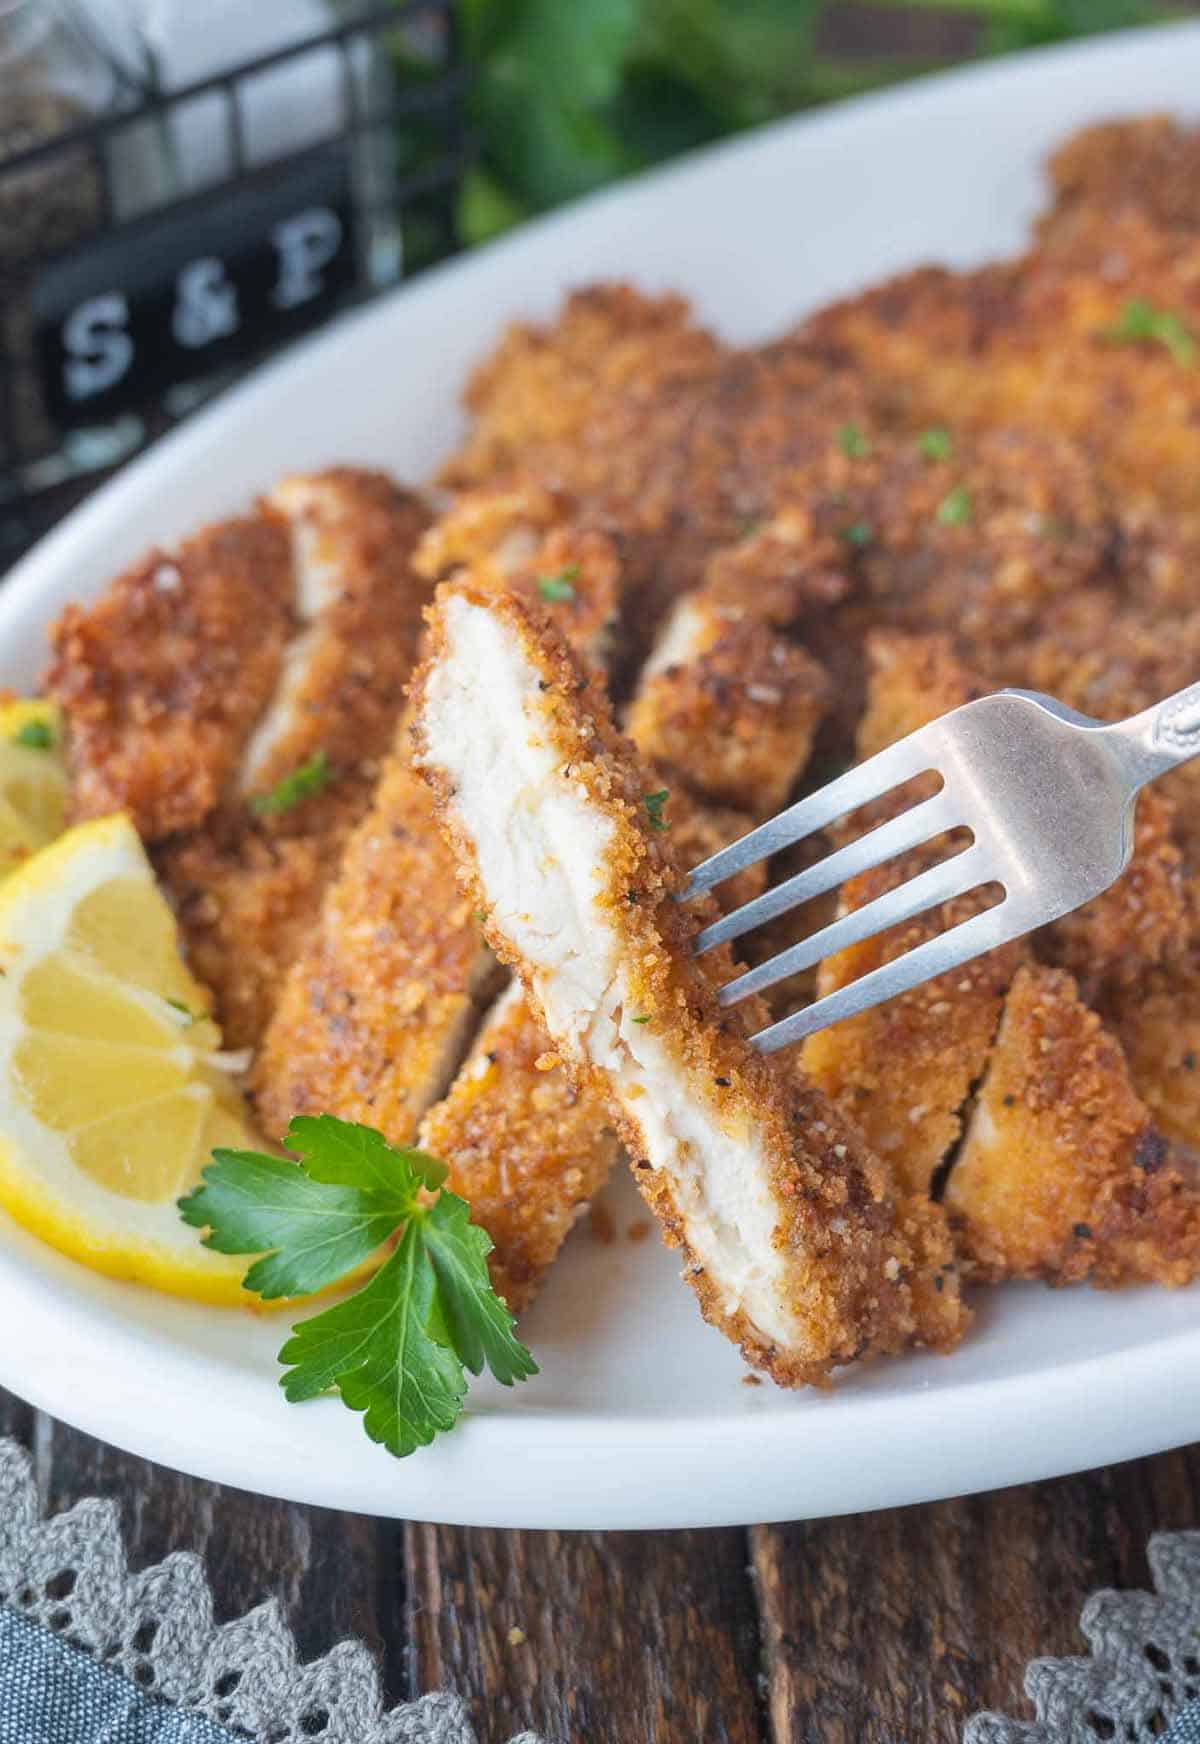 Crispy chicken cutlets cut into slices on a white plate with a lemon slice.